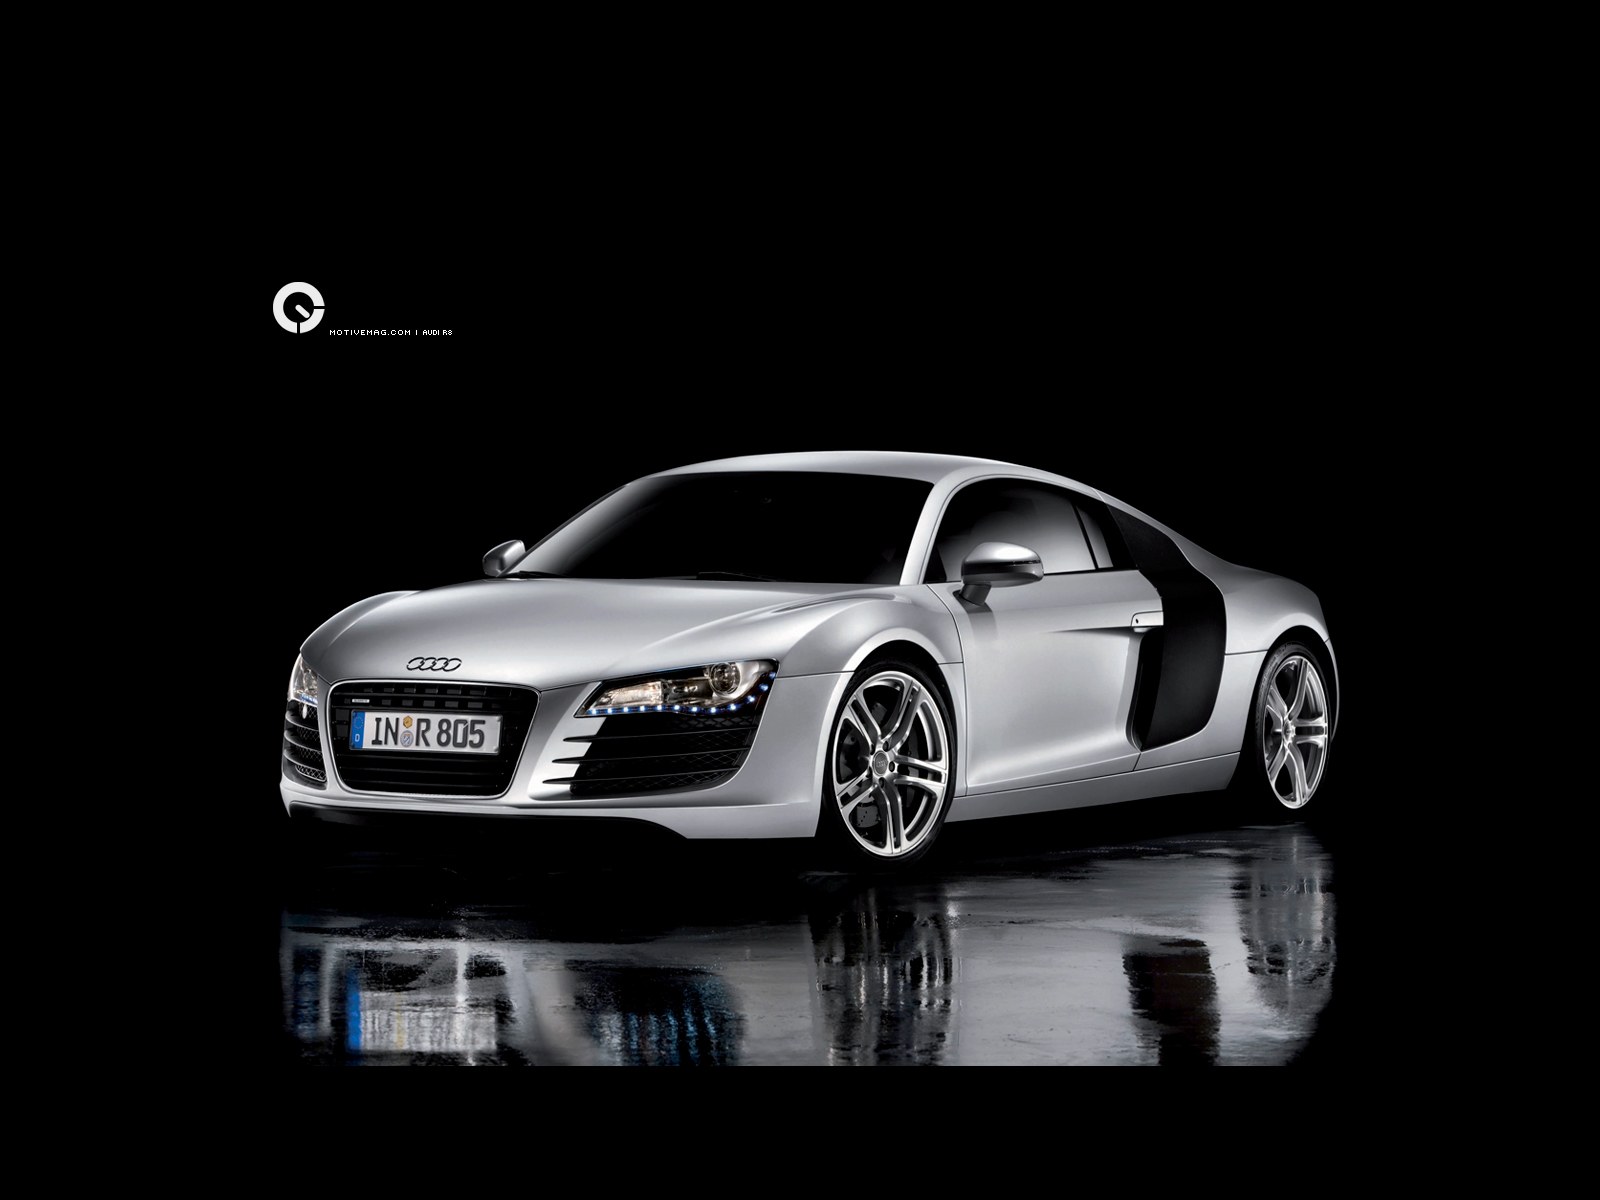 2011 Audi R8 Spyder another